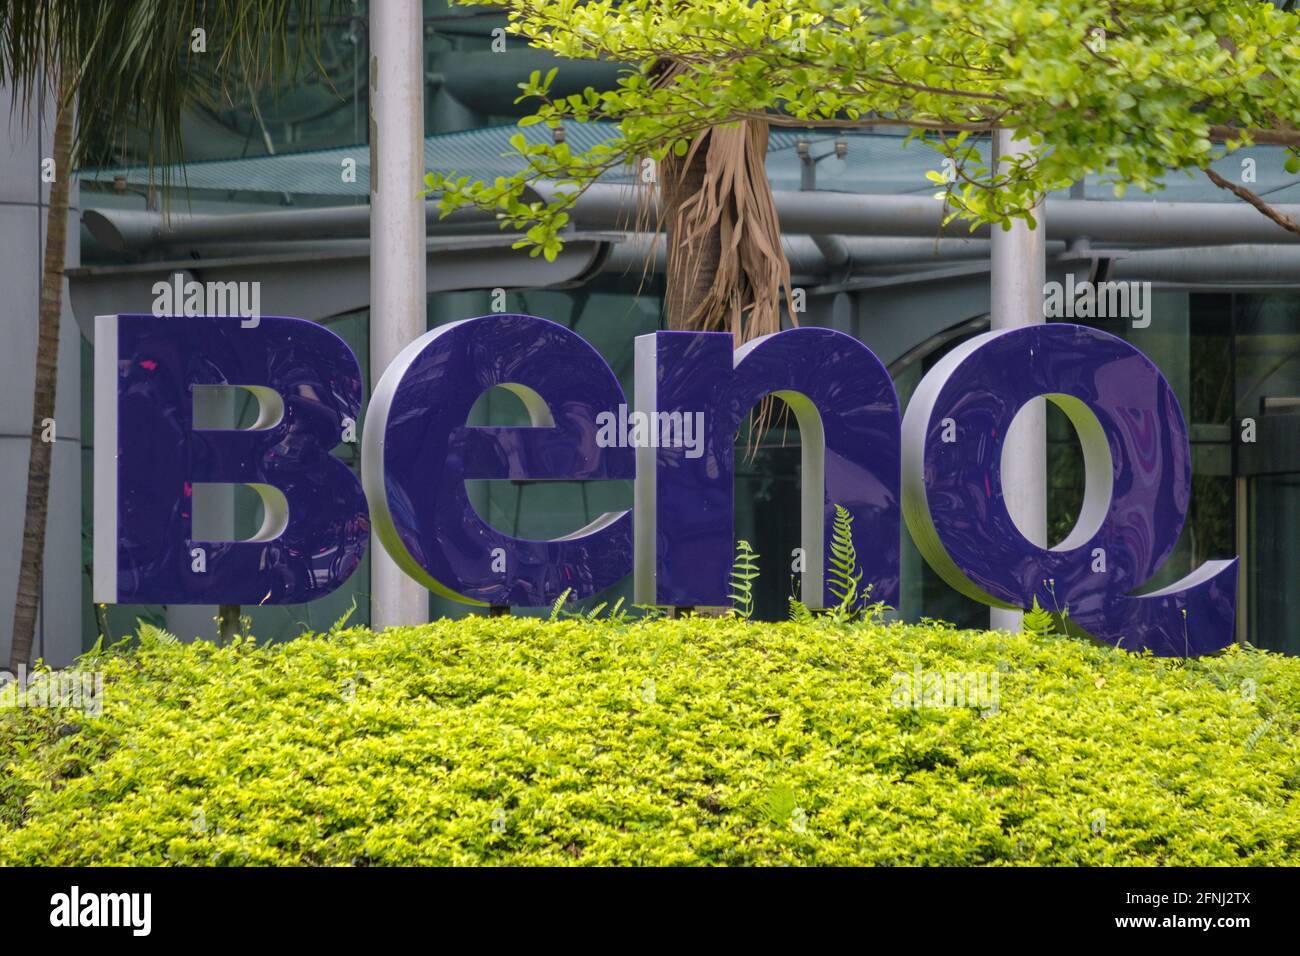 Taiwanese multinational company that sells and markets technology products,  consumer electronics, computing and communications devices, BenQ logo seen  in Taipei Stock Photo - Alamy